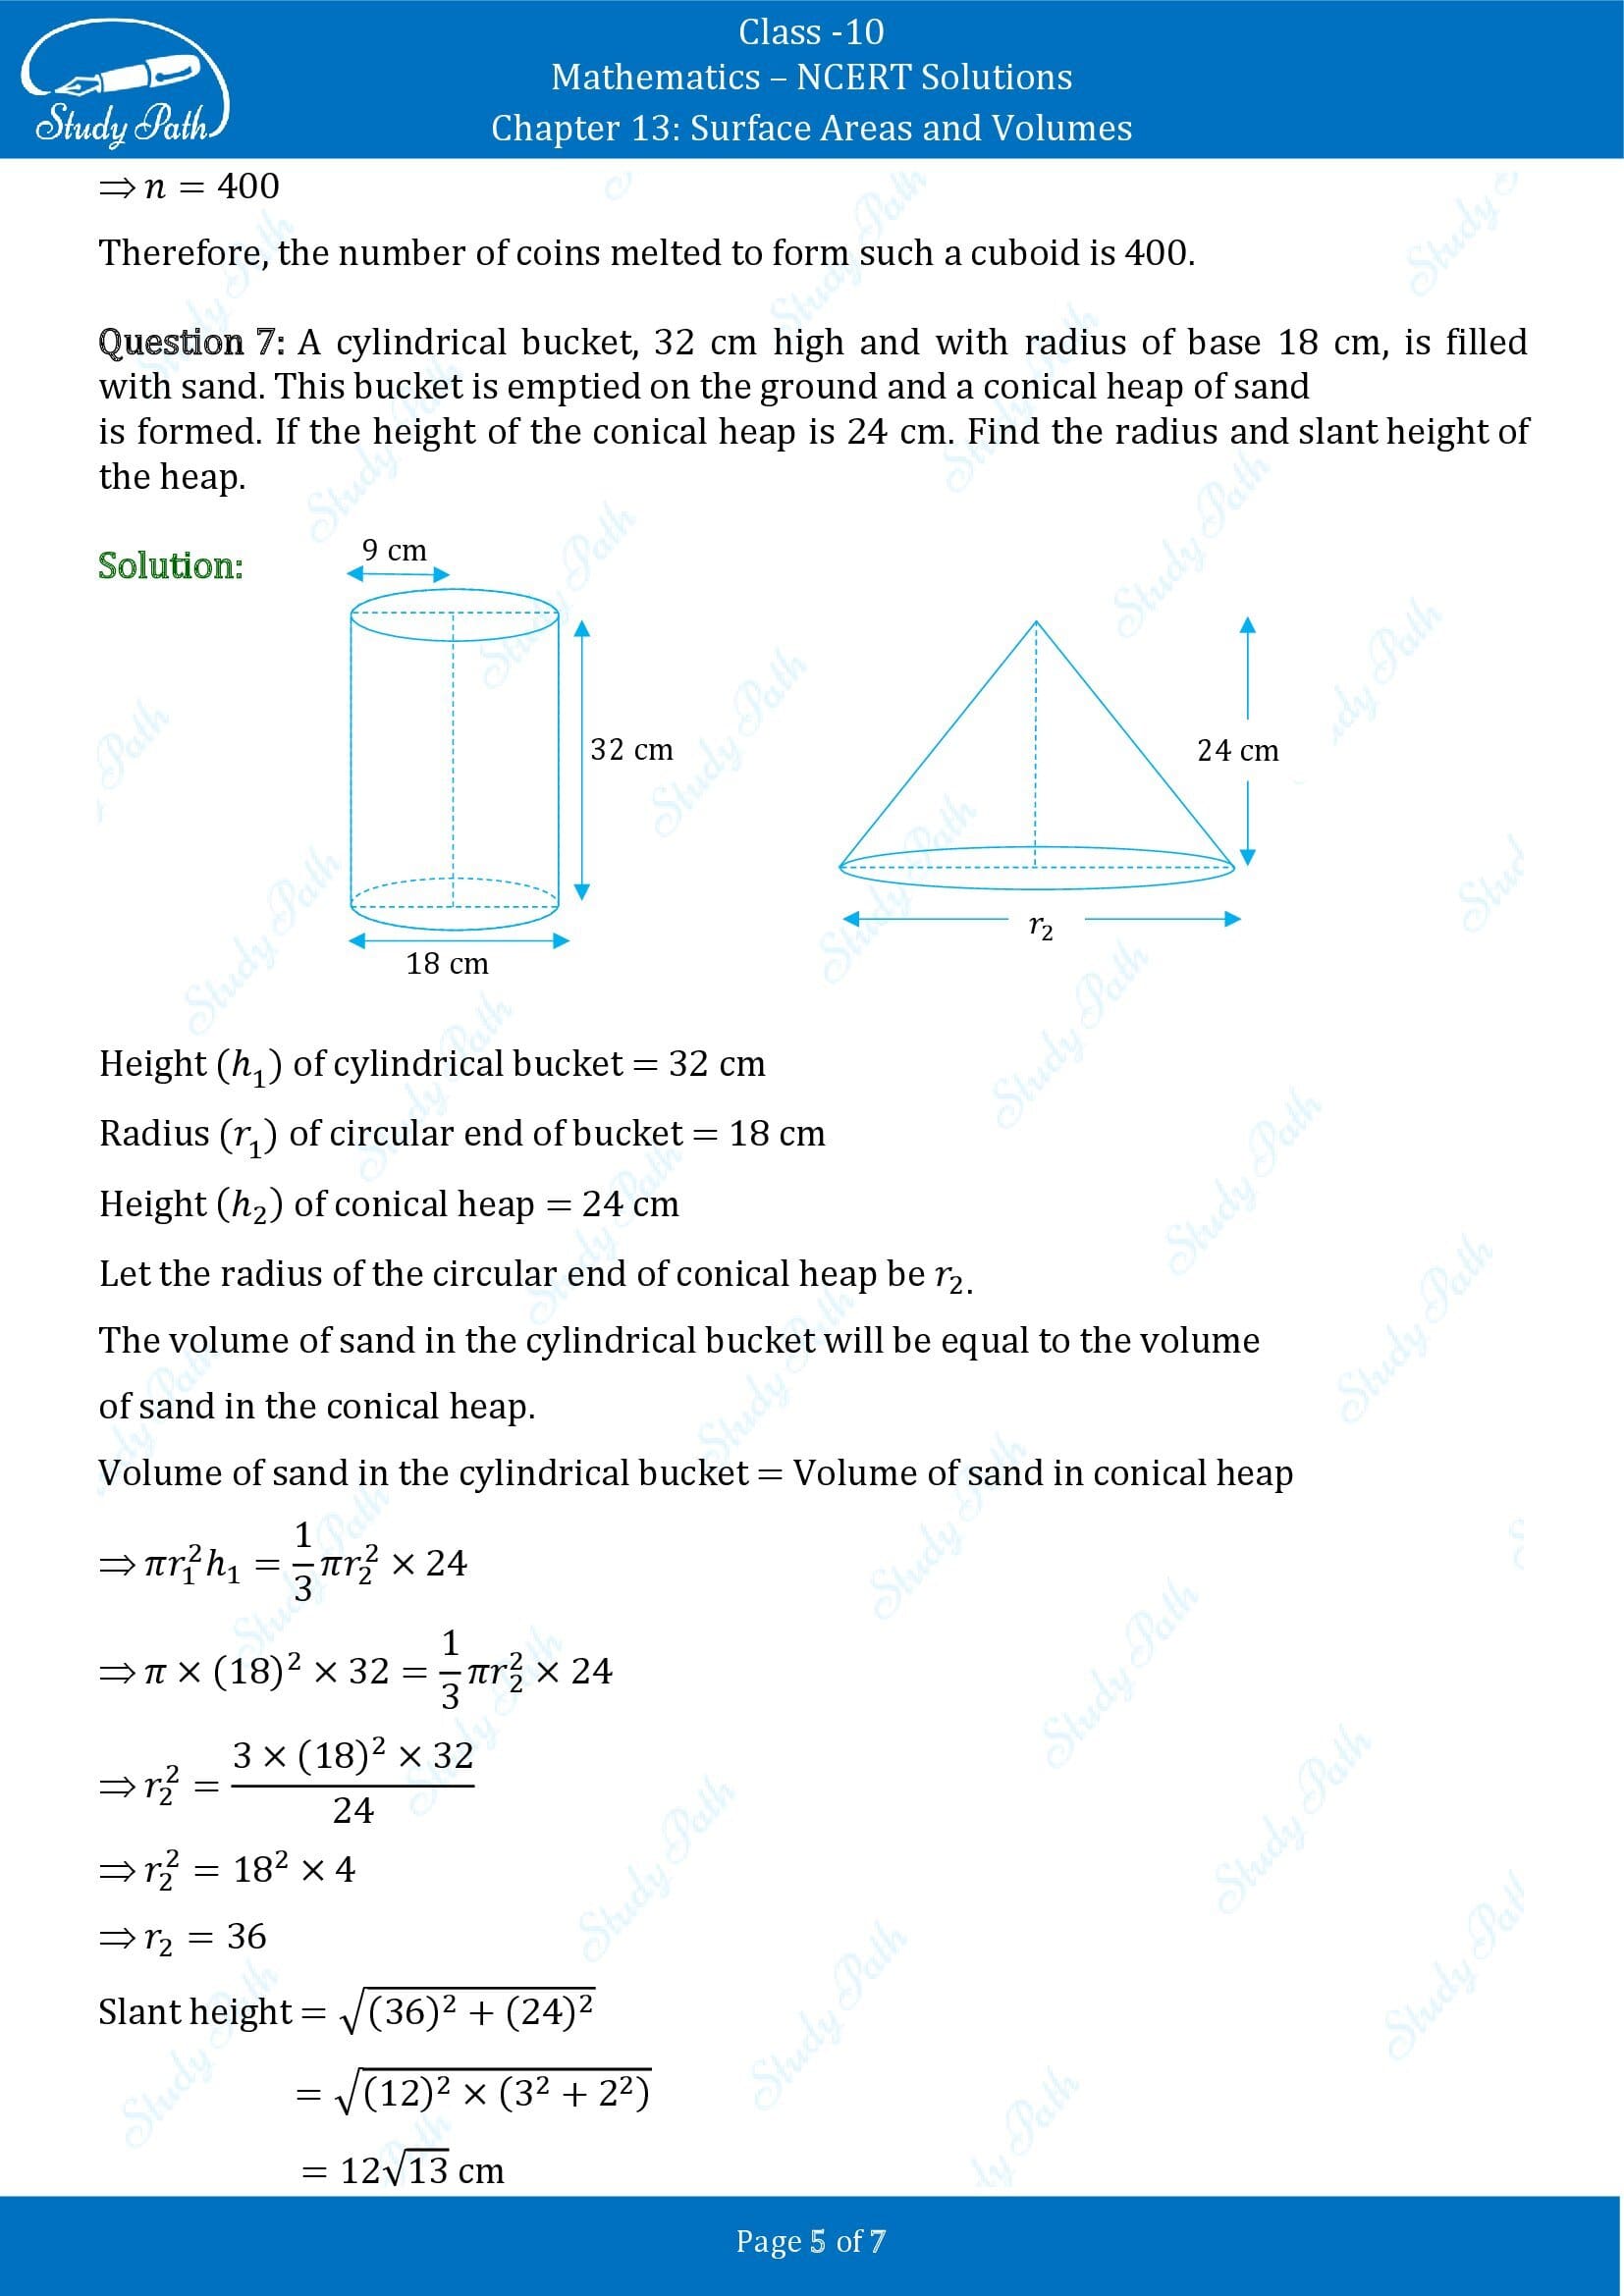 NCERT Solutions for Class 10 Maths Chapter 13 Surface Areas and Volumes Exercise 13.3 00005